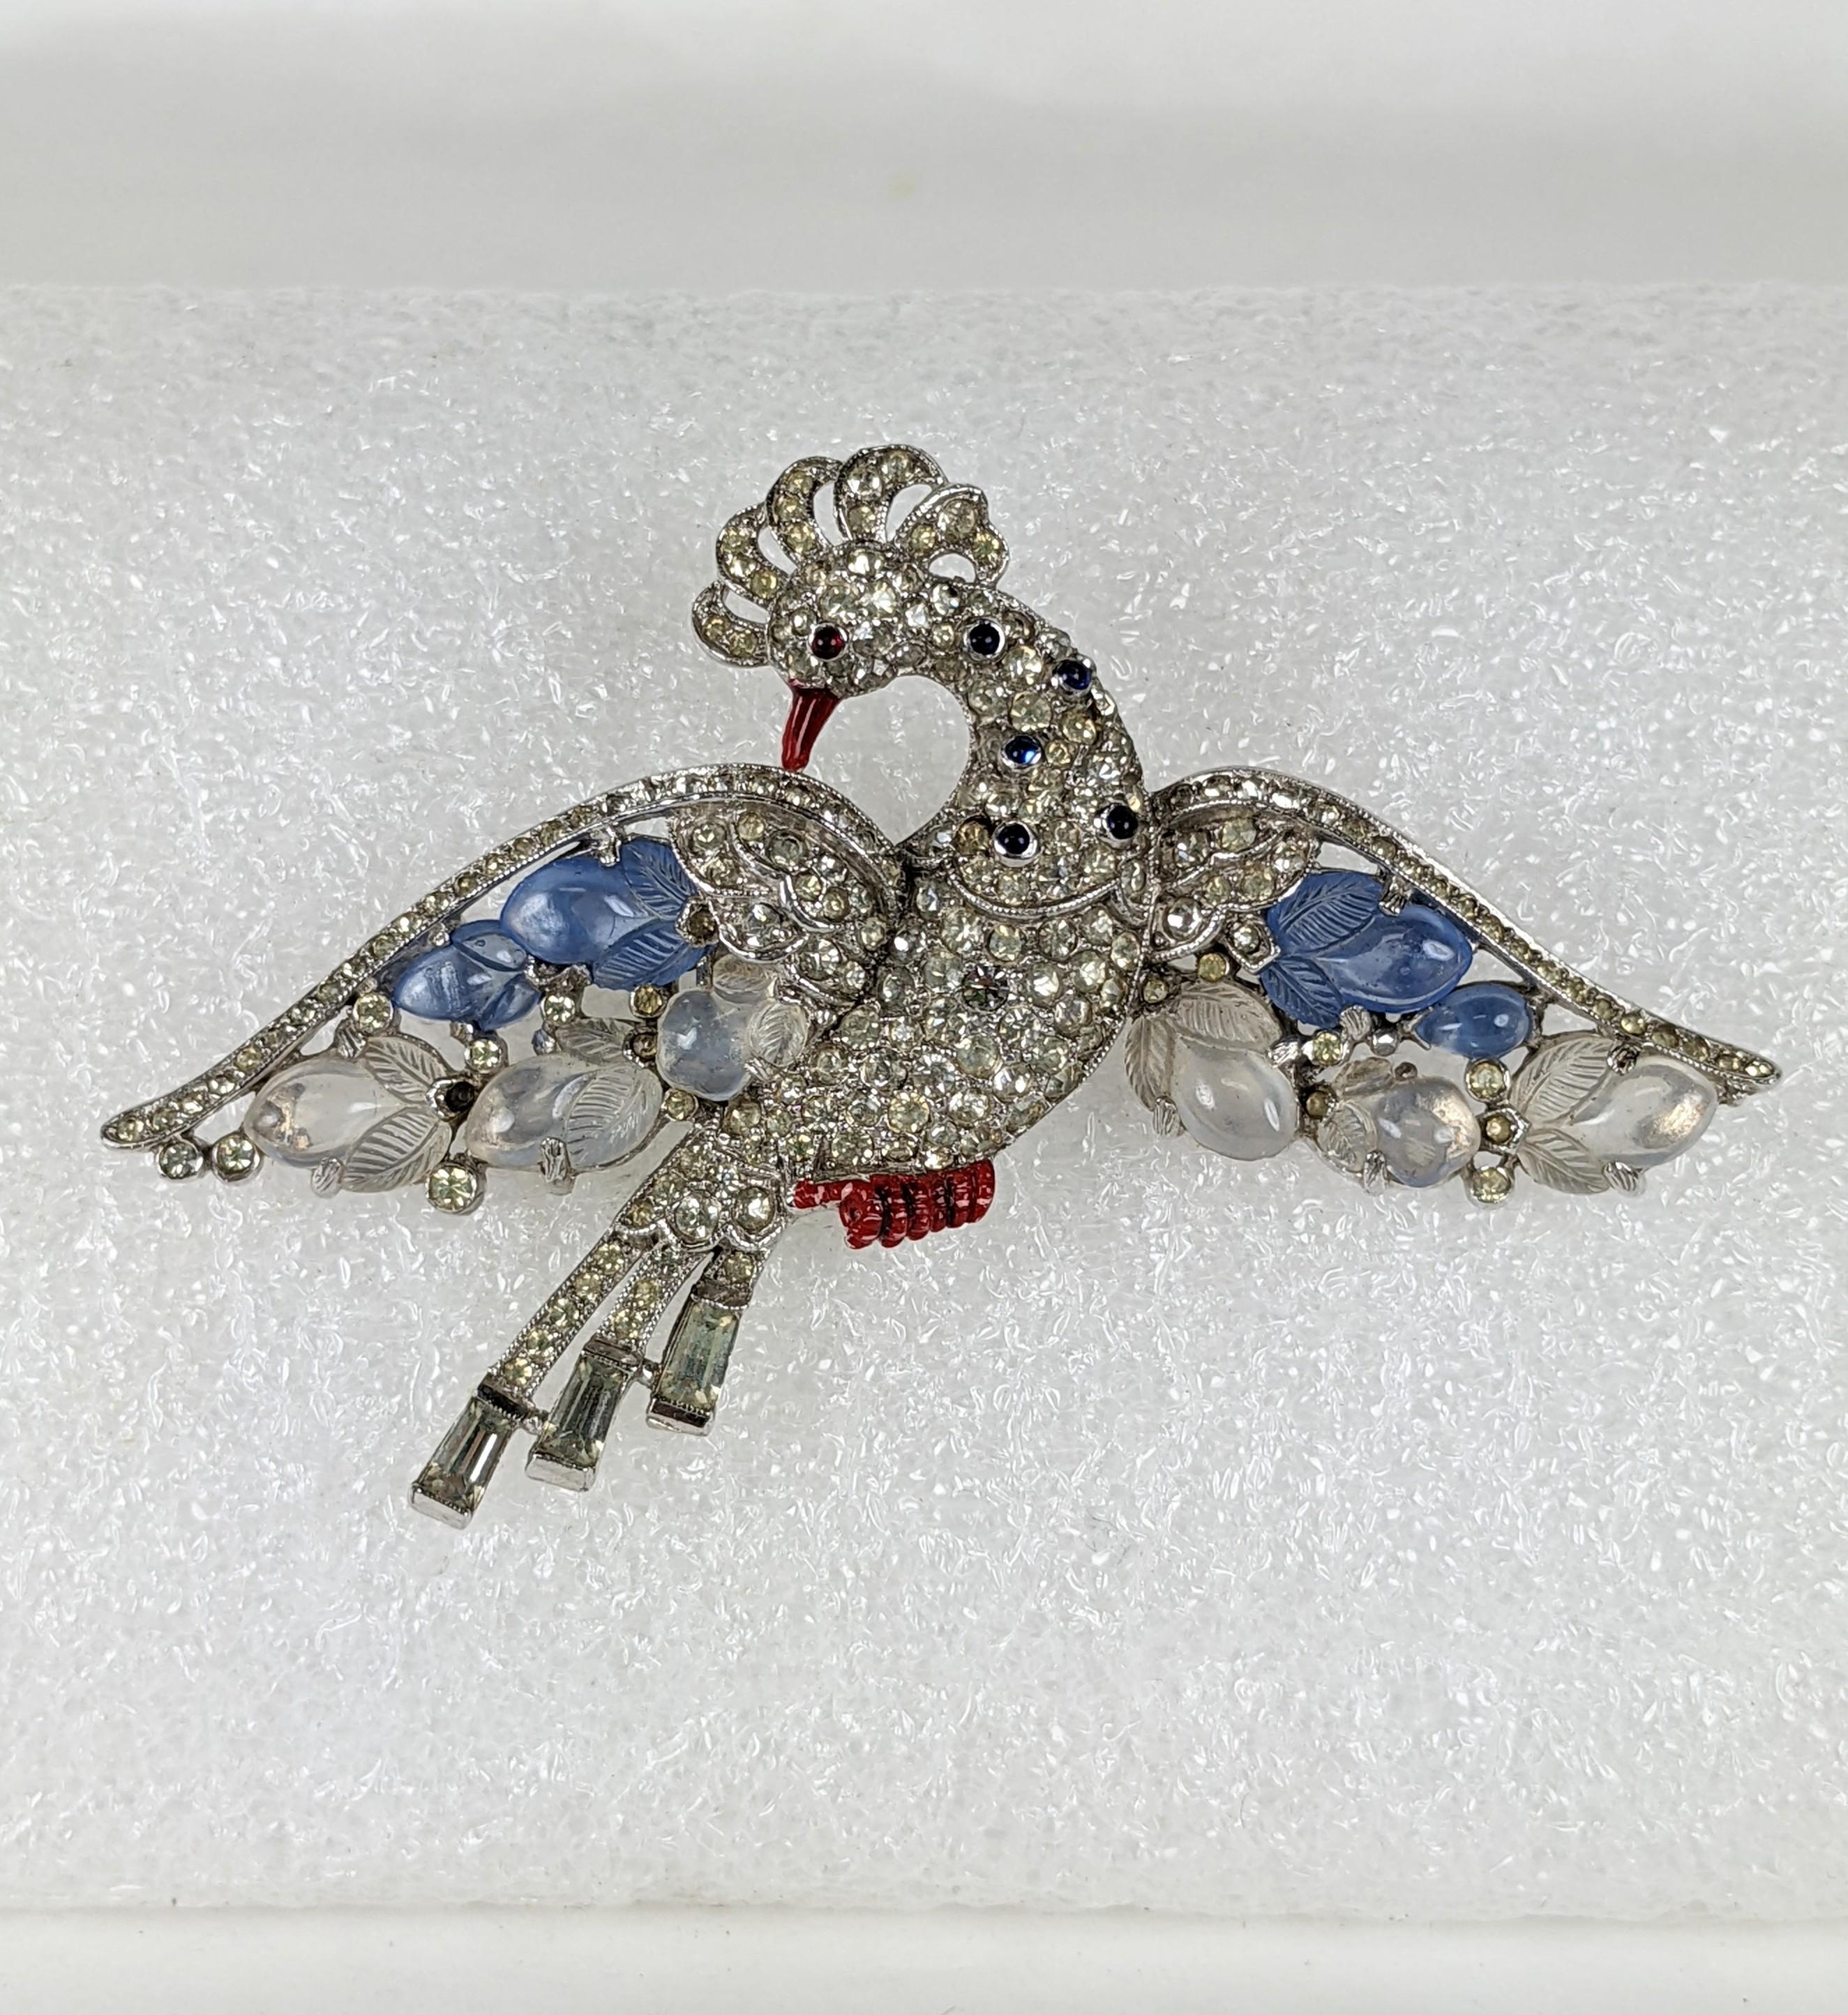 Alfred Philippe for Trifari pave and blue and white opal fruit salad rising peacock in flight. Of rhodium plated base metal, crystal rhinestone pave and key stone baguettes, small ruby and sapphire cabochons, molded  glass fruit salad with cold